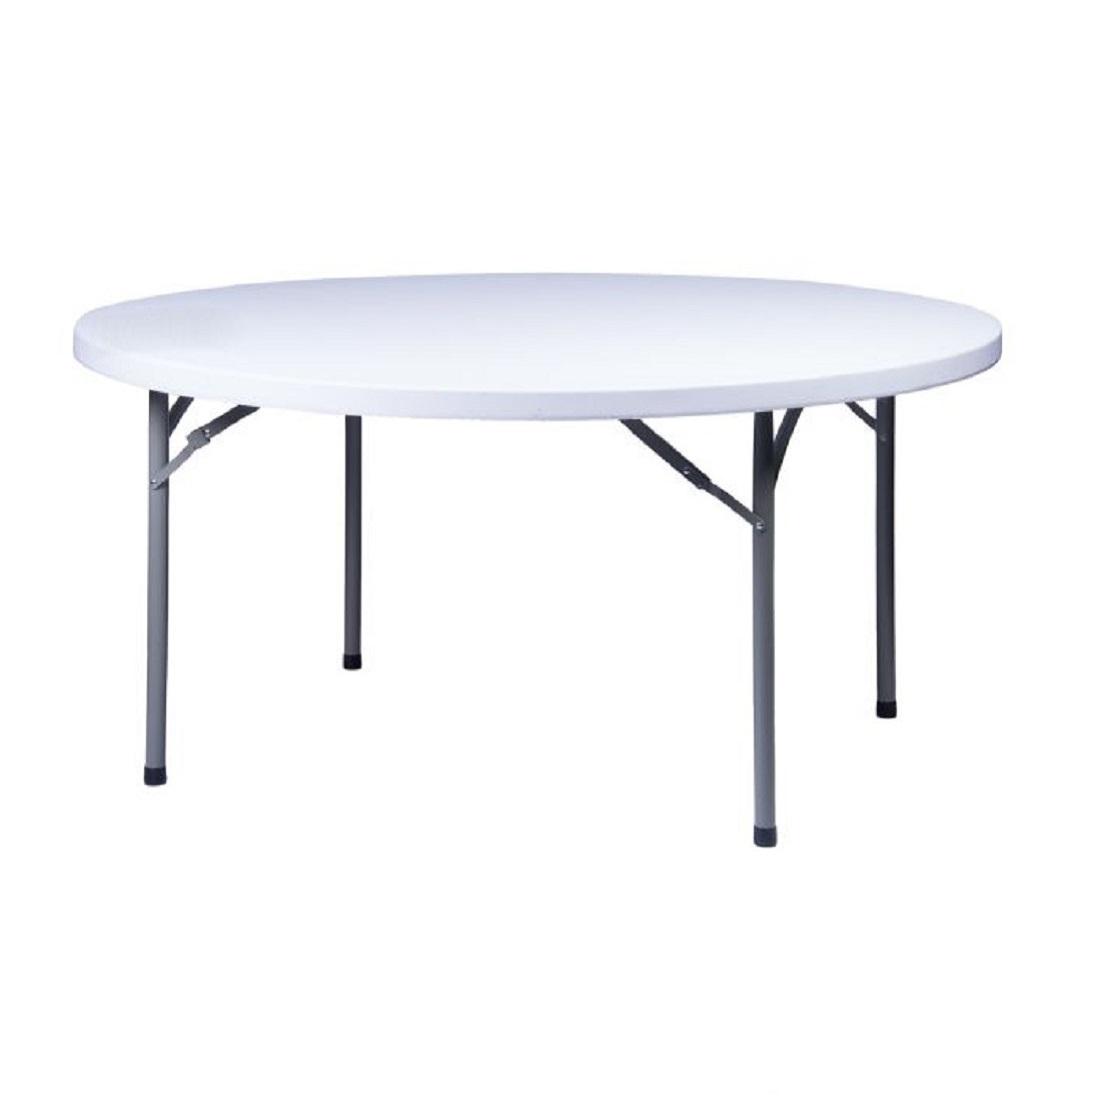 60" Round Table Rentals, Table and Tent Rentals